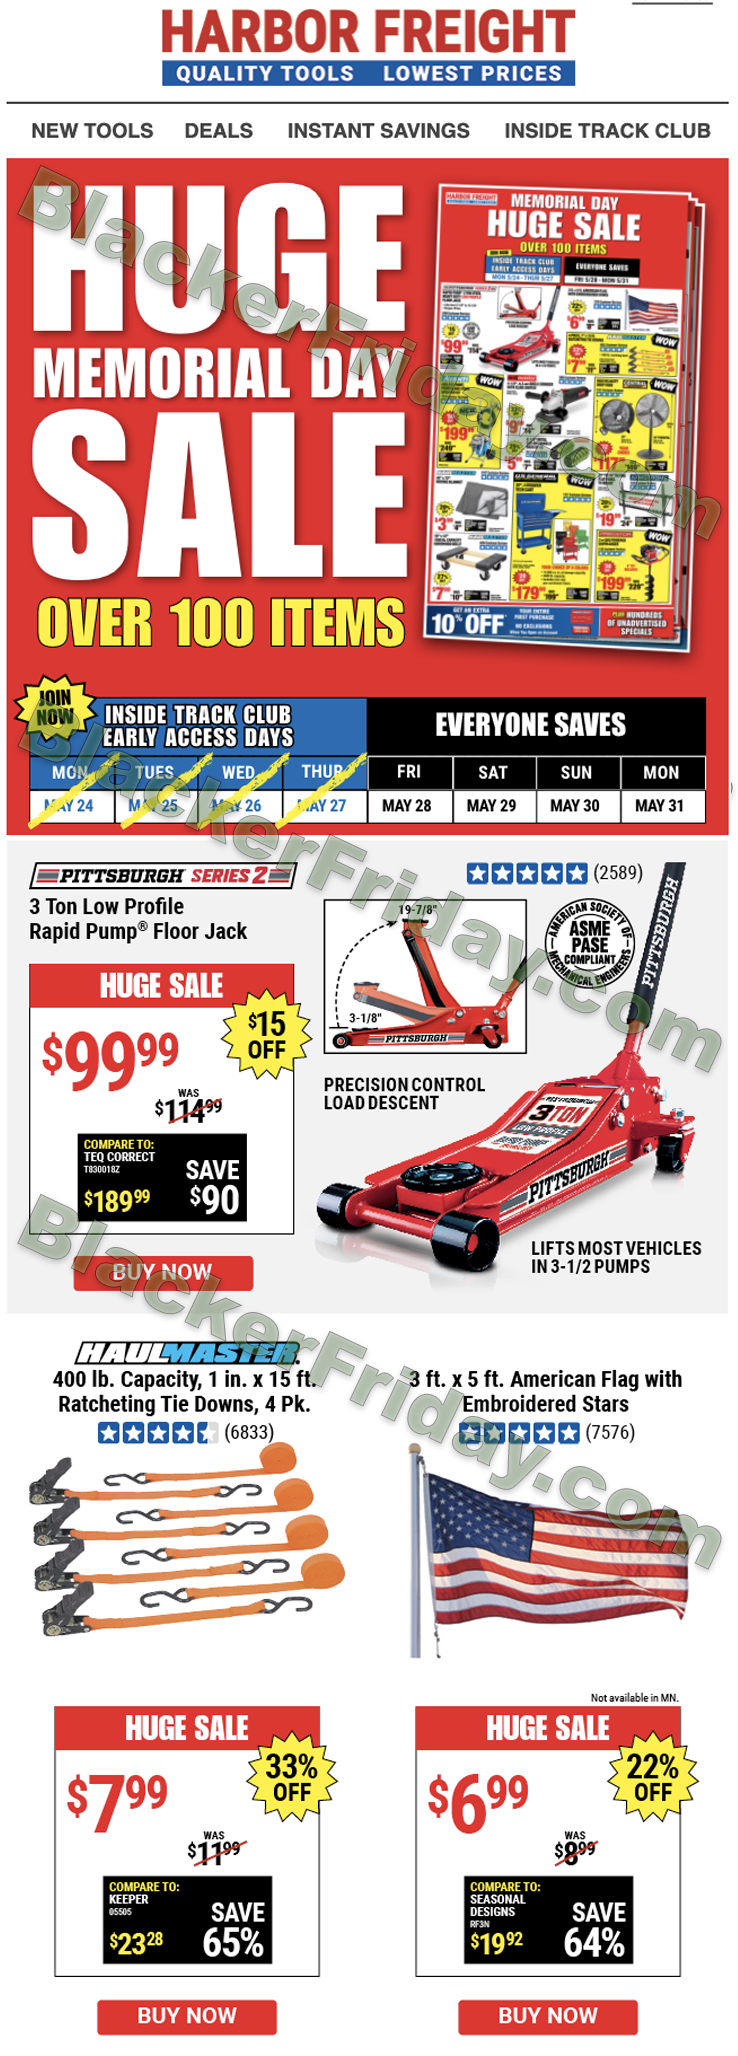 Harbor Freight Tools Memorial Day 2022 Sale & Ad - Blacker Friday